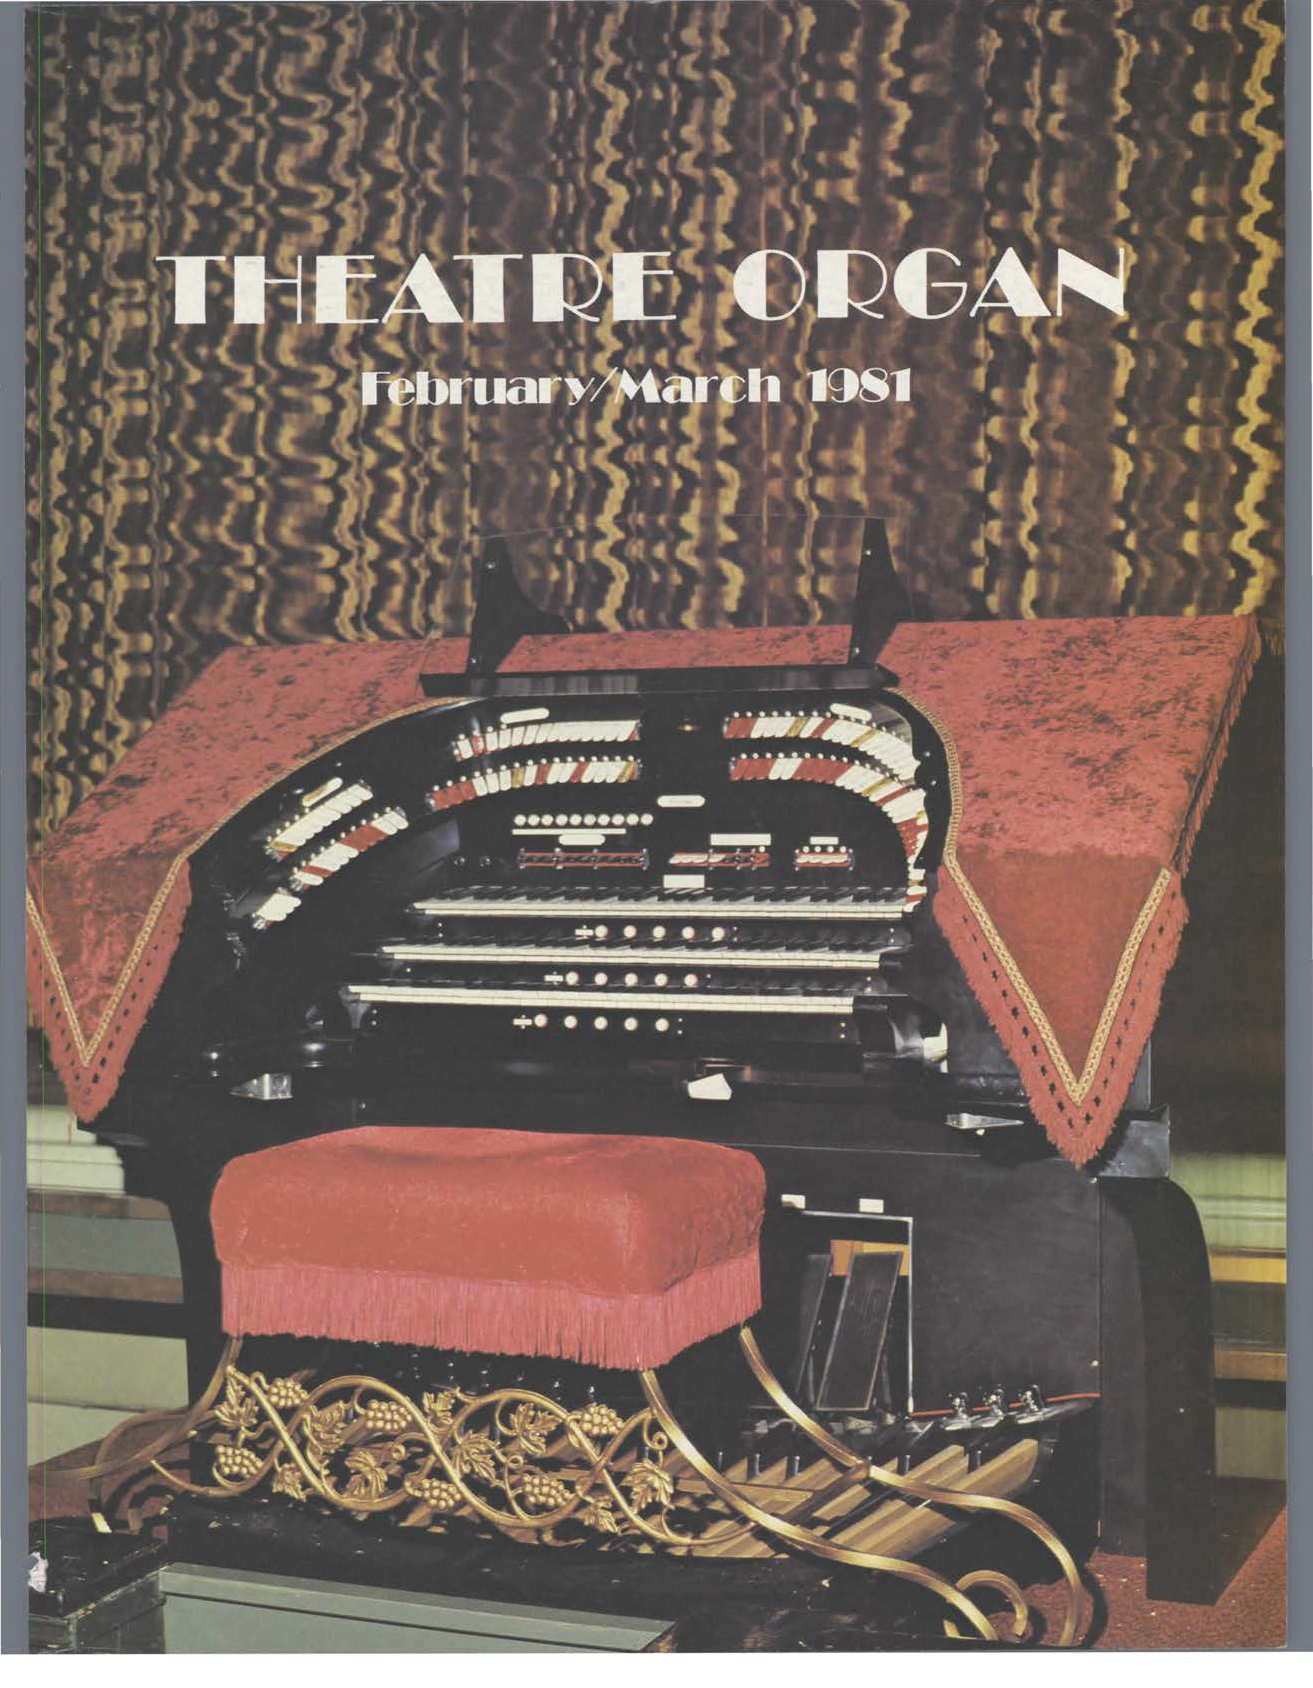 Theatre Organ, February - March 1981, Volume 23, Number 1